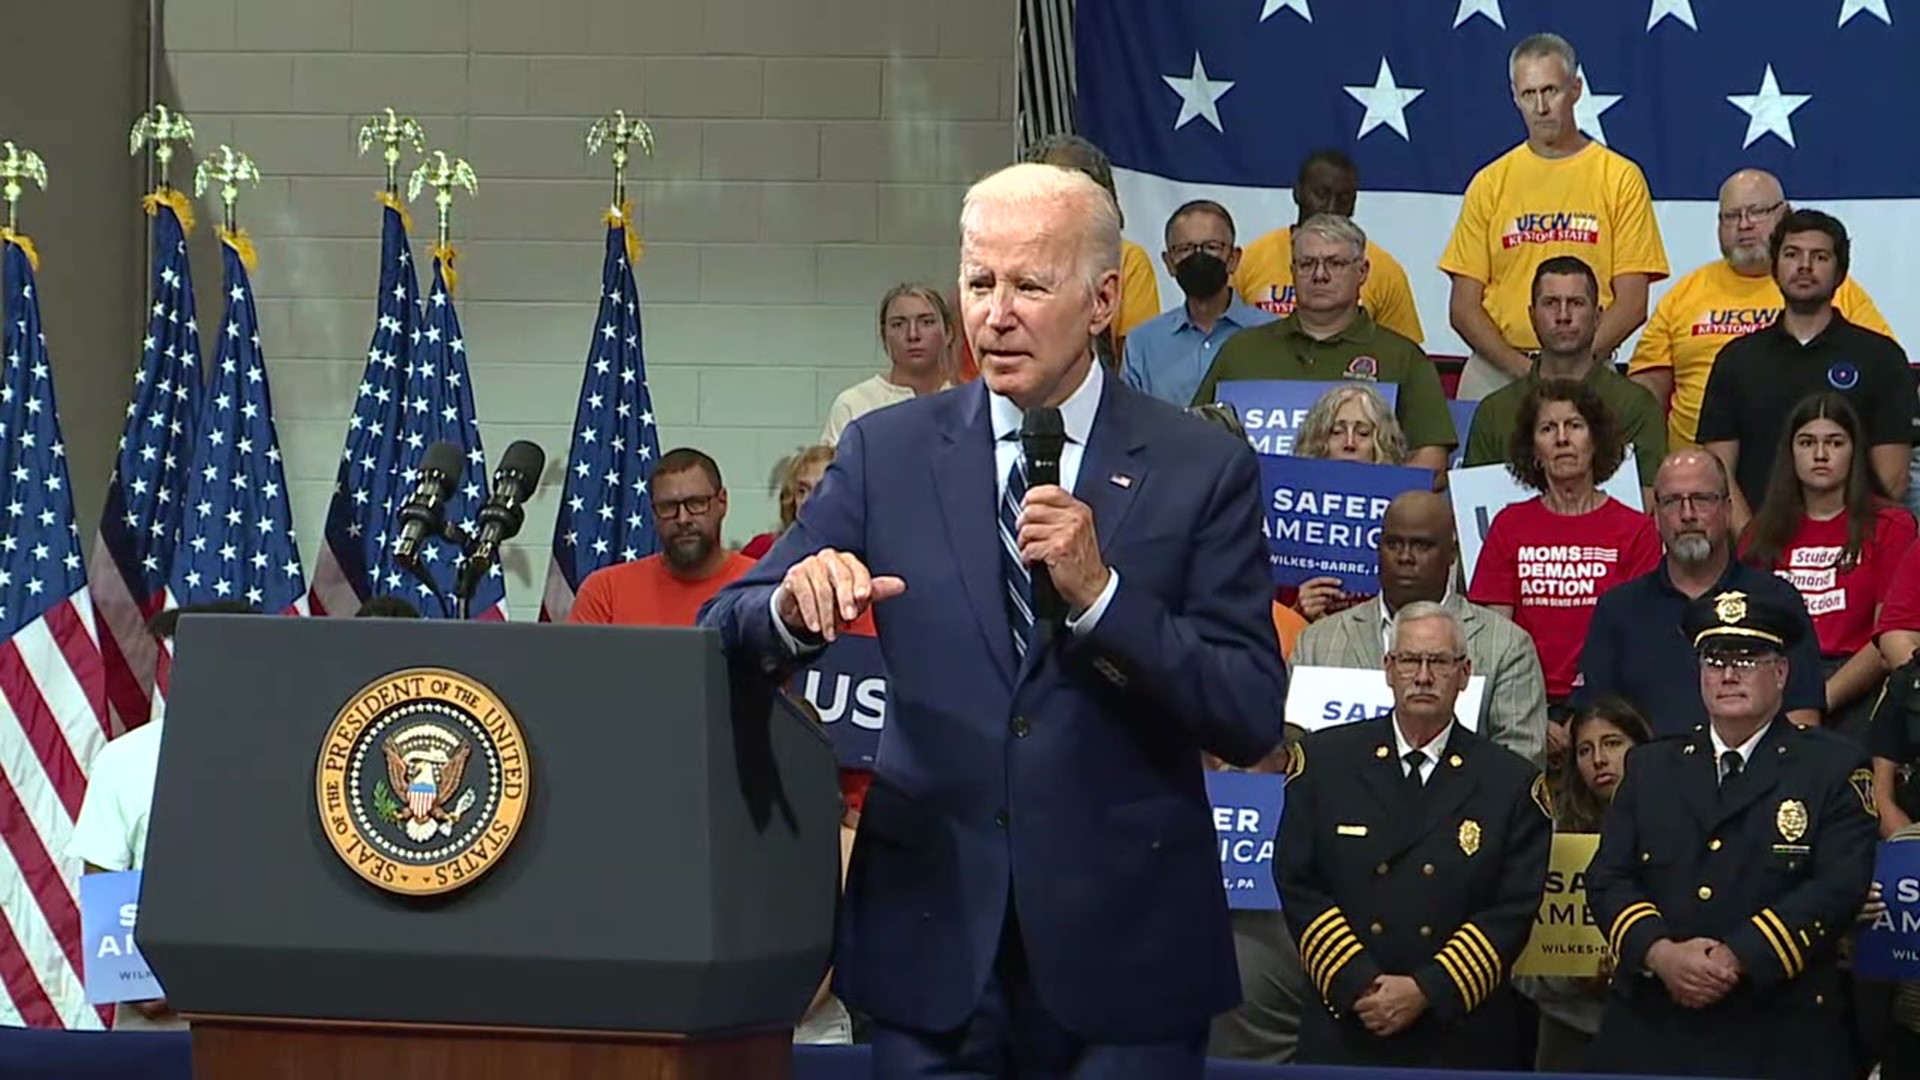 President Joe Biden referenced his birthplace during an address about his "Safer America Plan." A Scranton native was right behind the president during his speech.